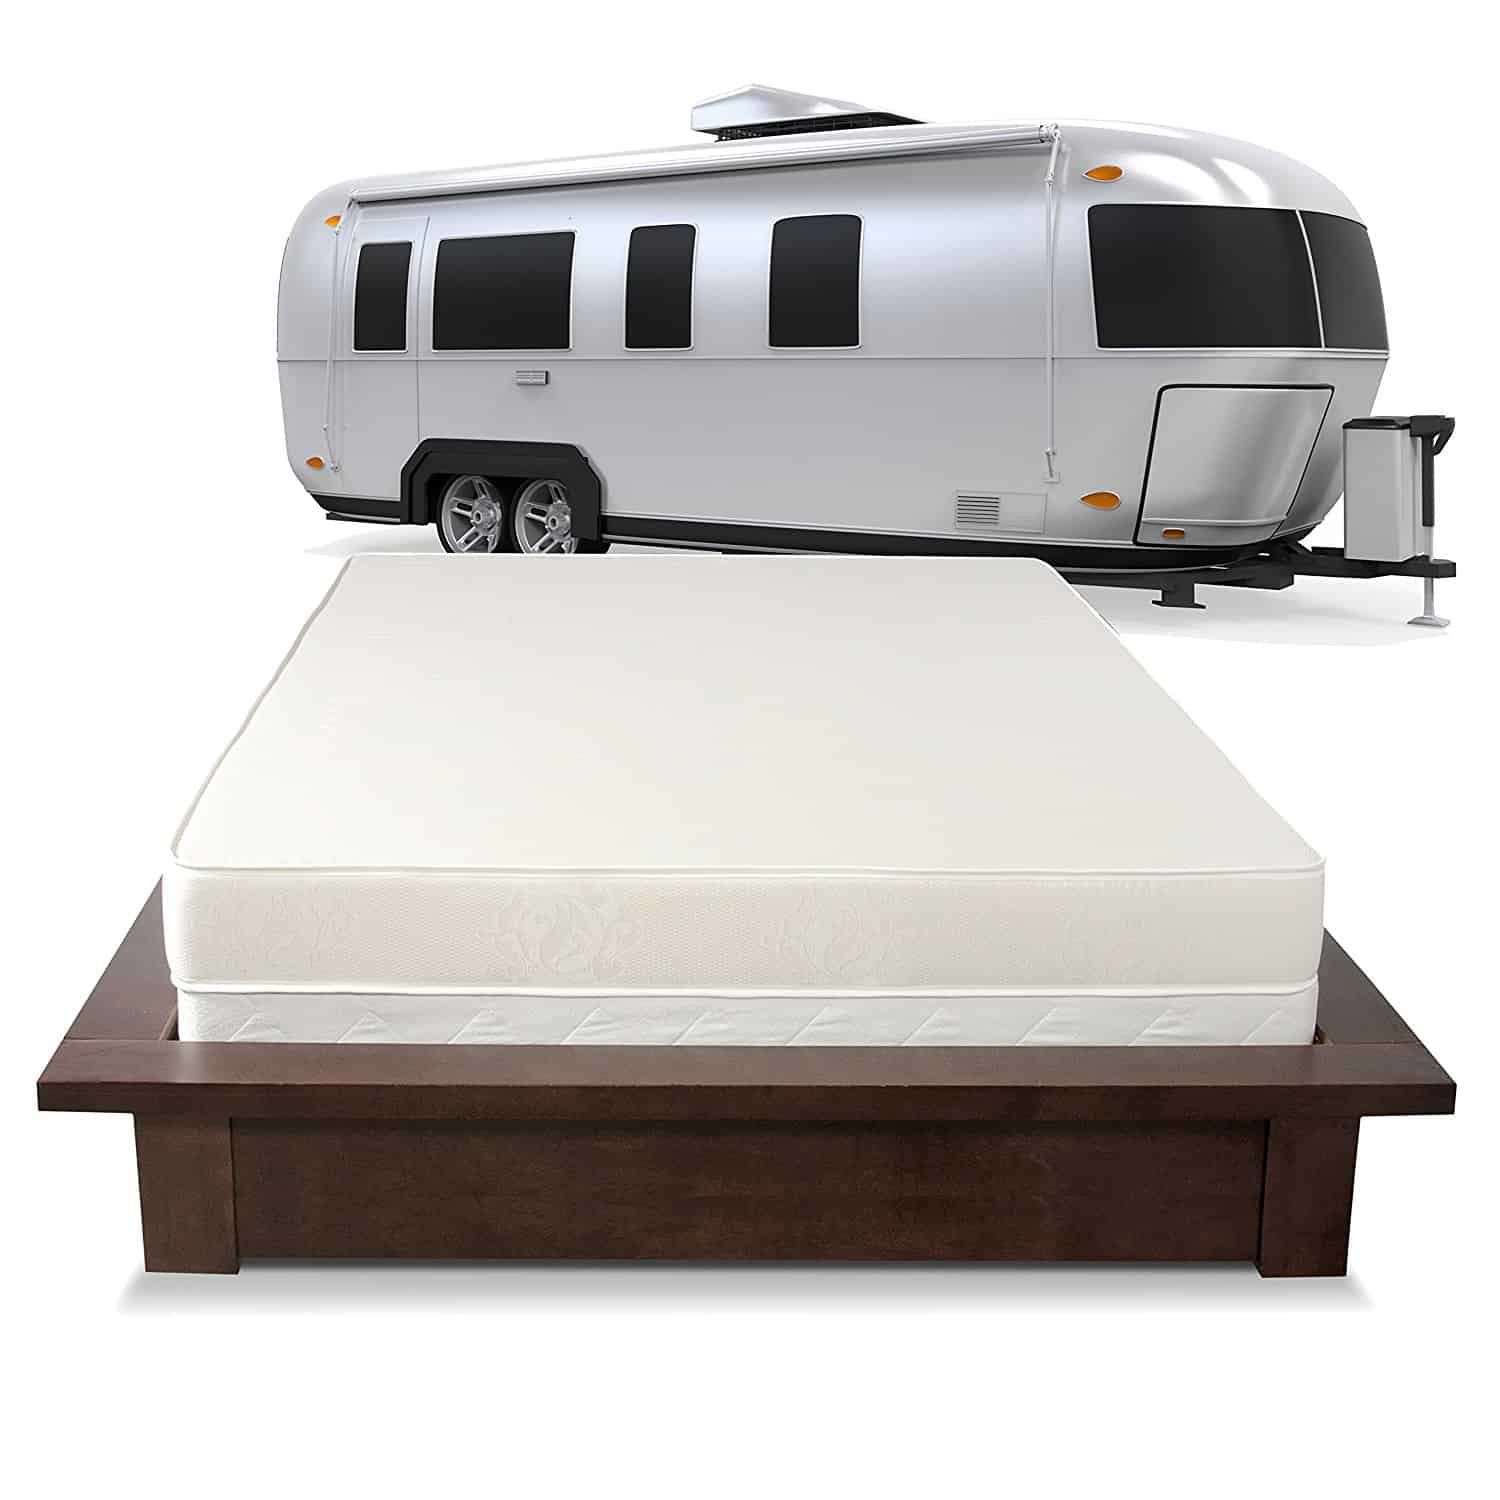 Rv Mattress Sizes Types And Places To Buy Them The Sleep Judge